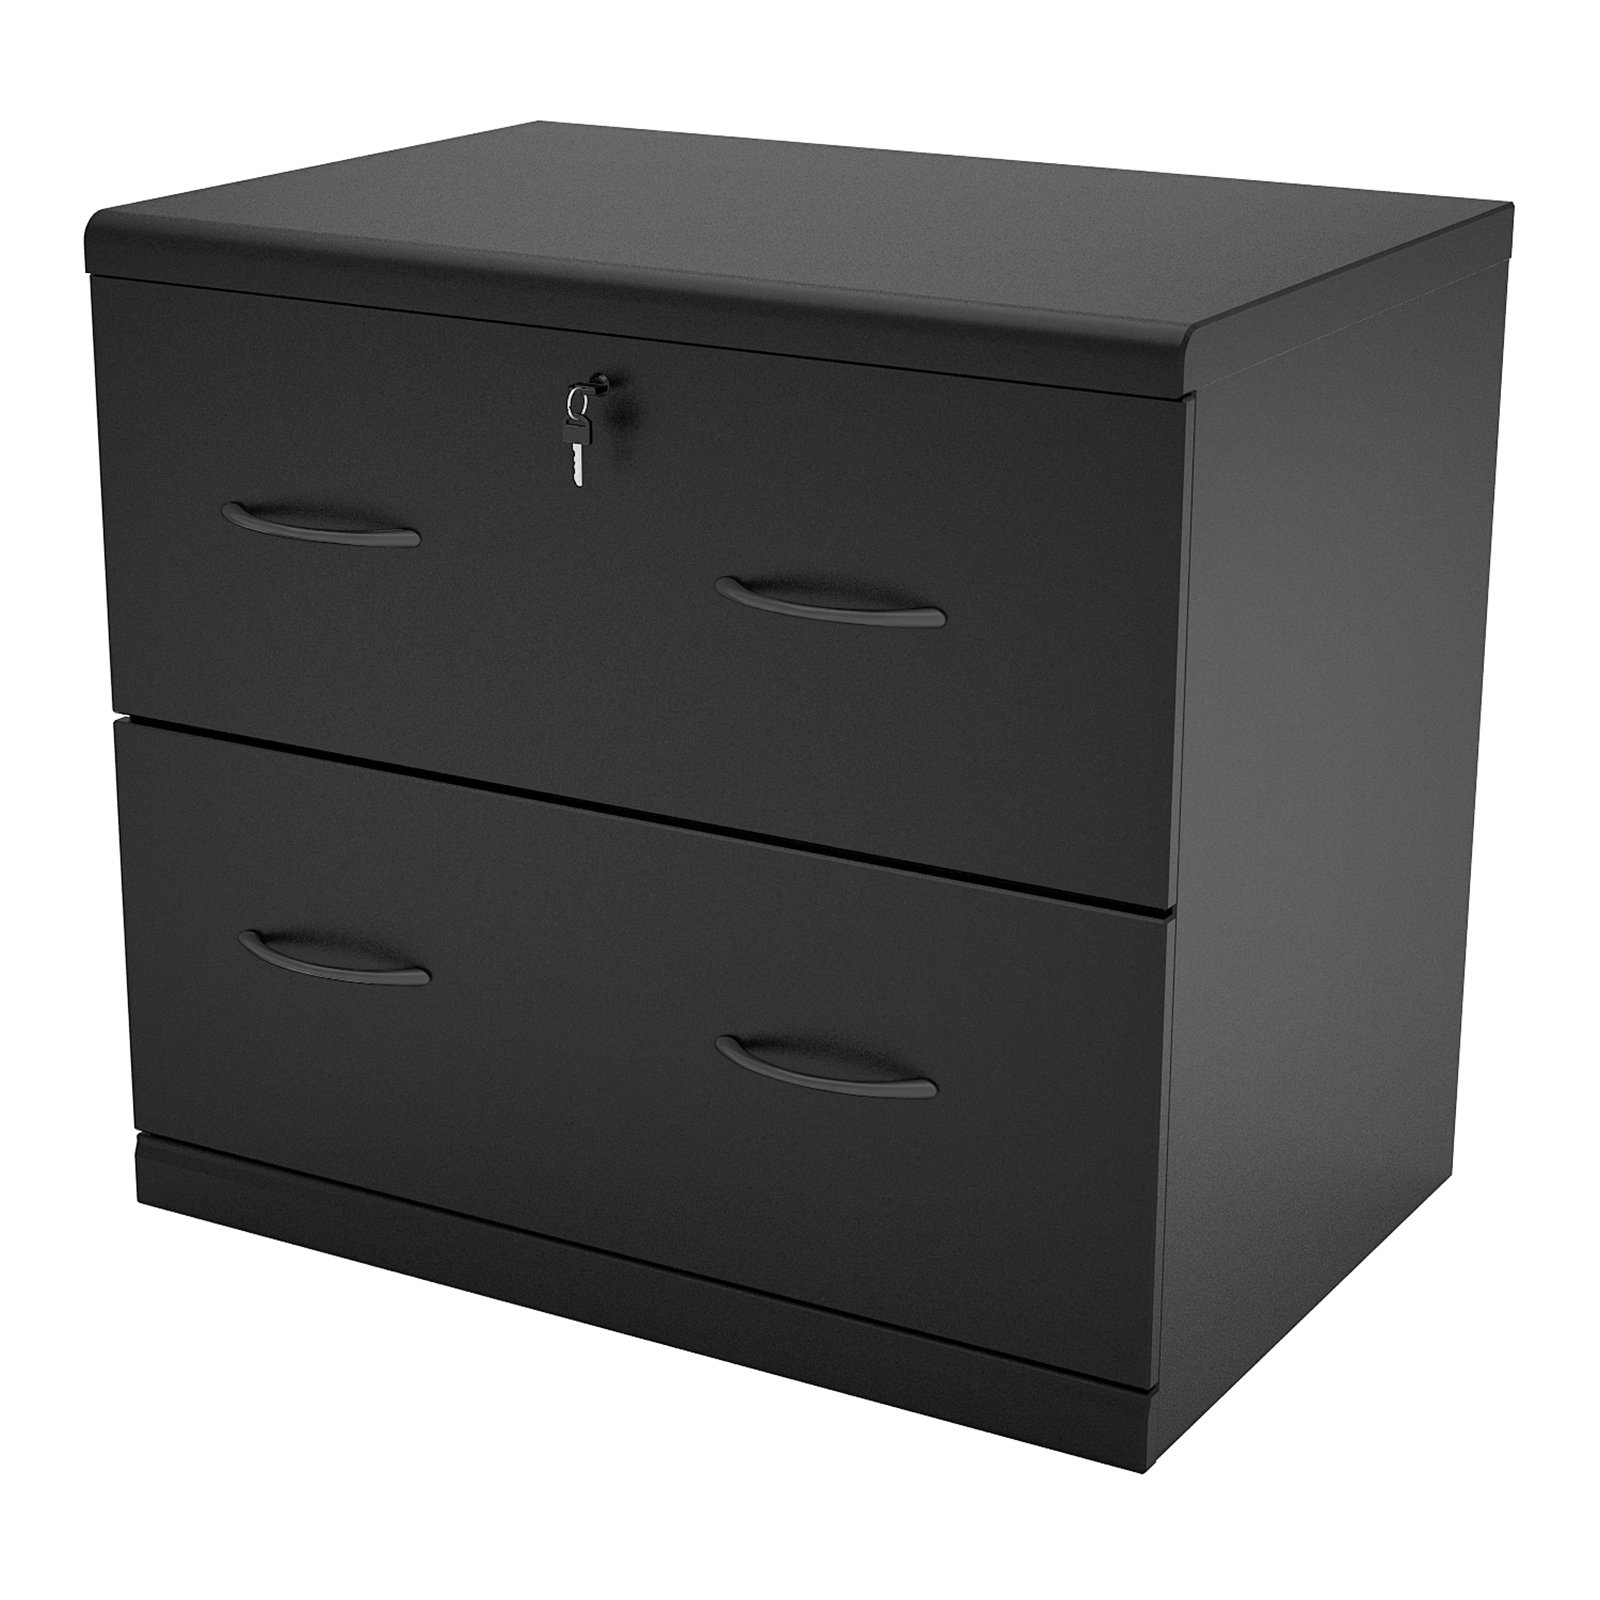 2 Drawer Lateral Wood Lockable Filing Cabinet Black Walmart with regard to size 1600 X 1600